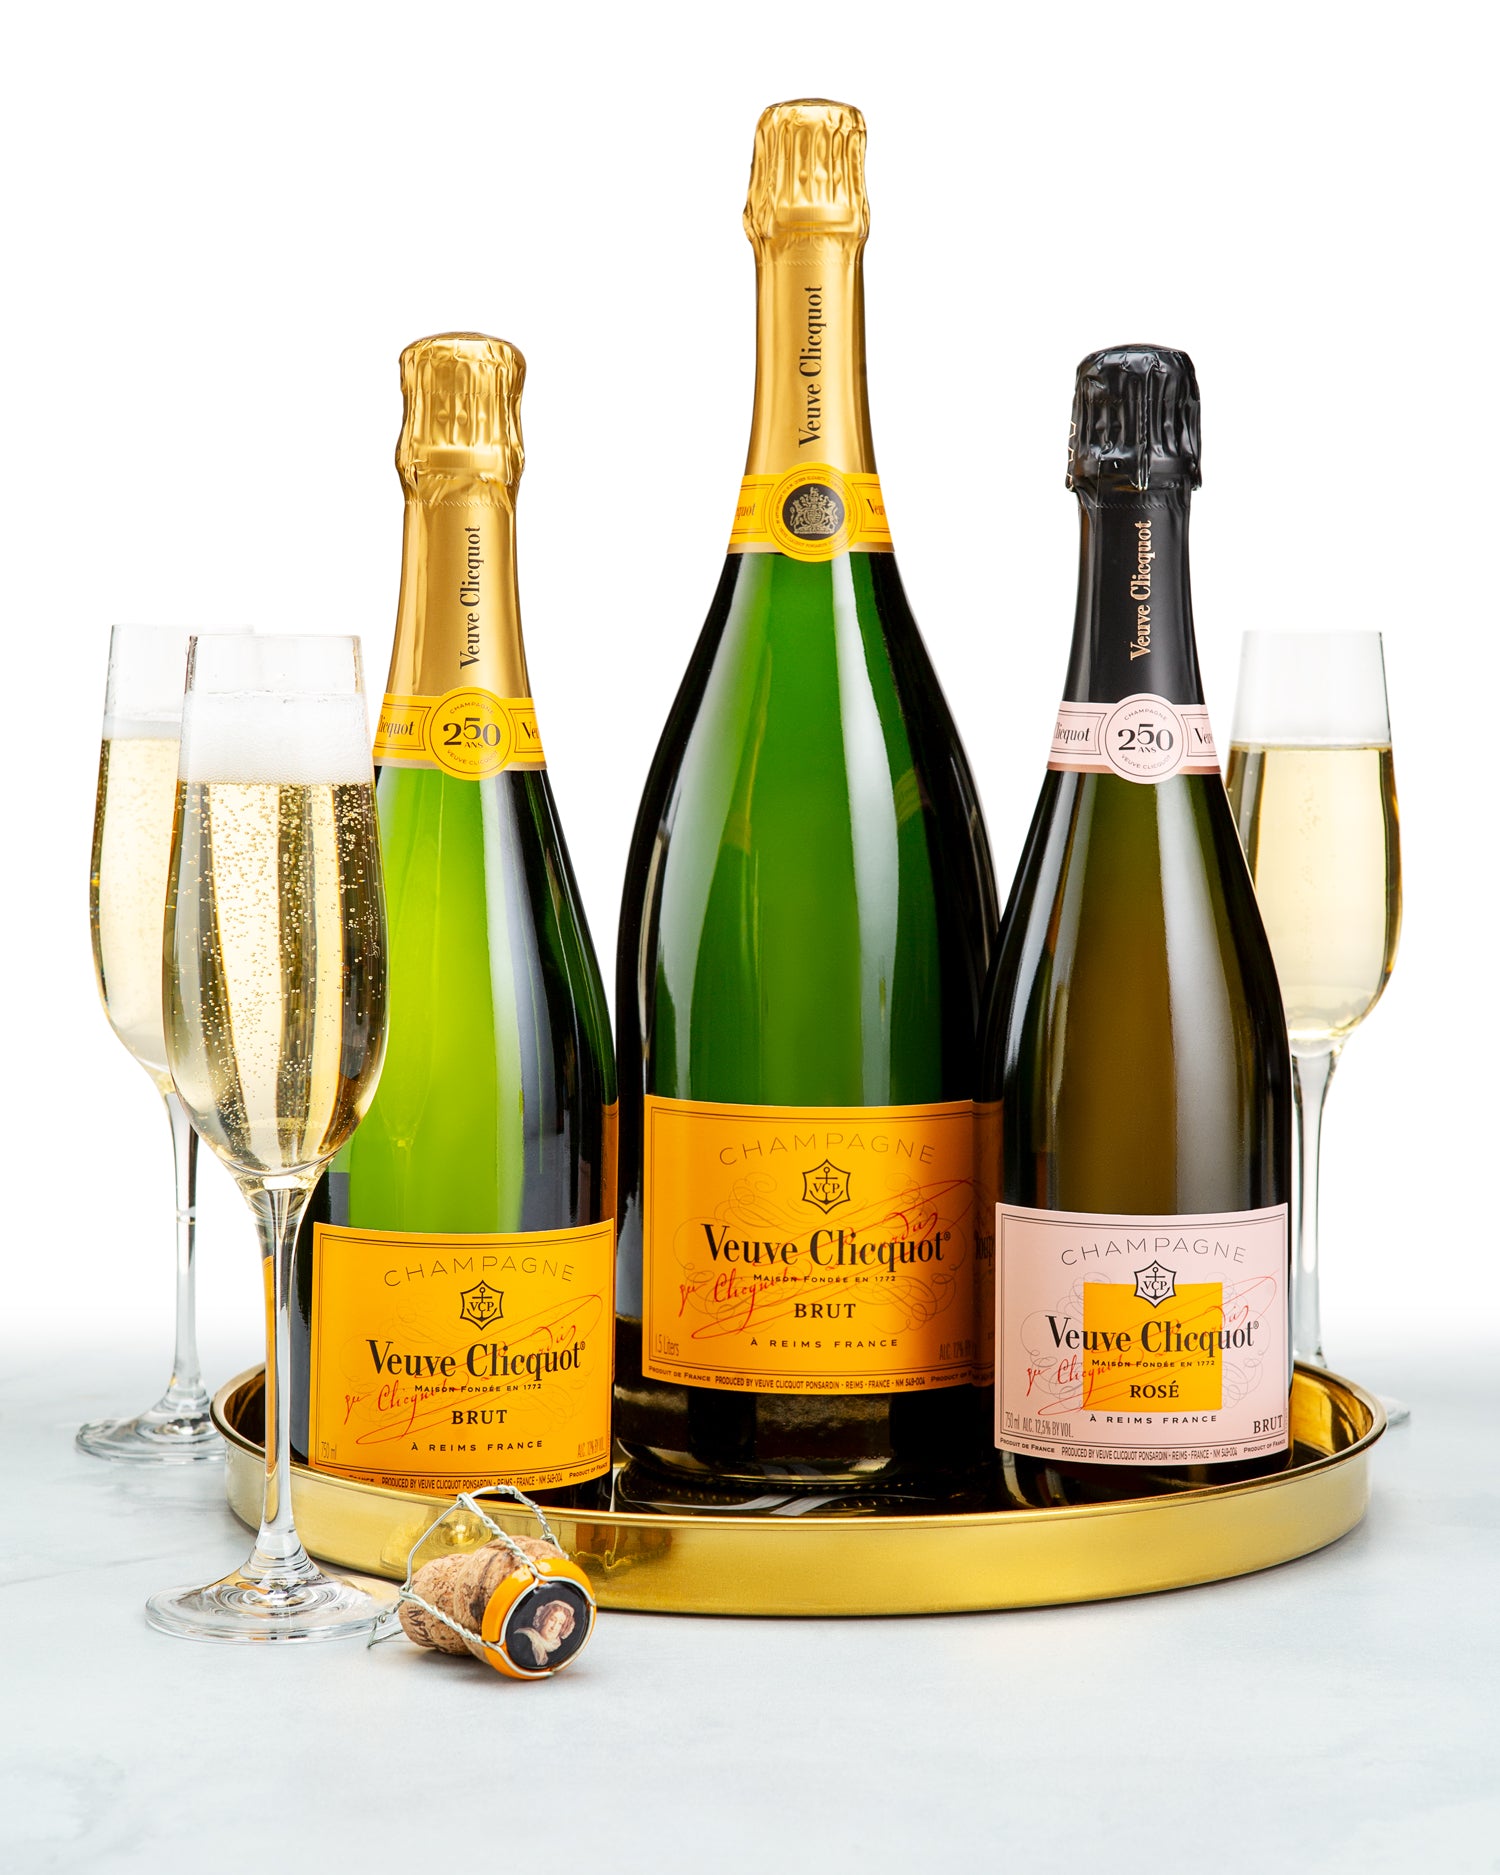 Veuve Clicquot presented on gold tray